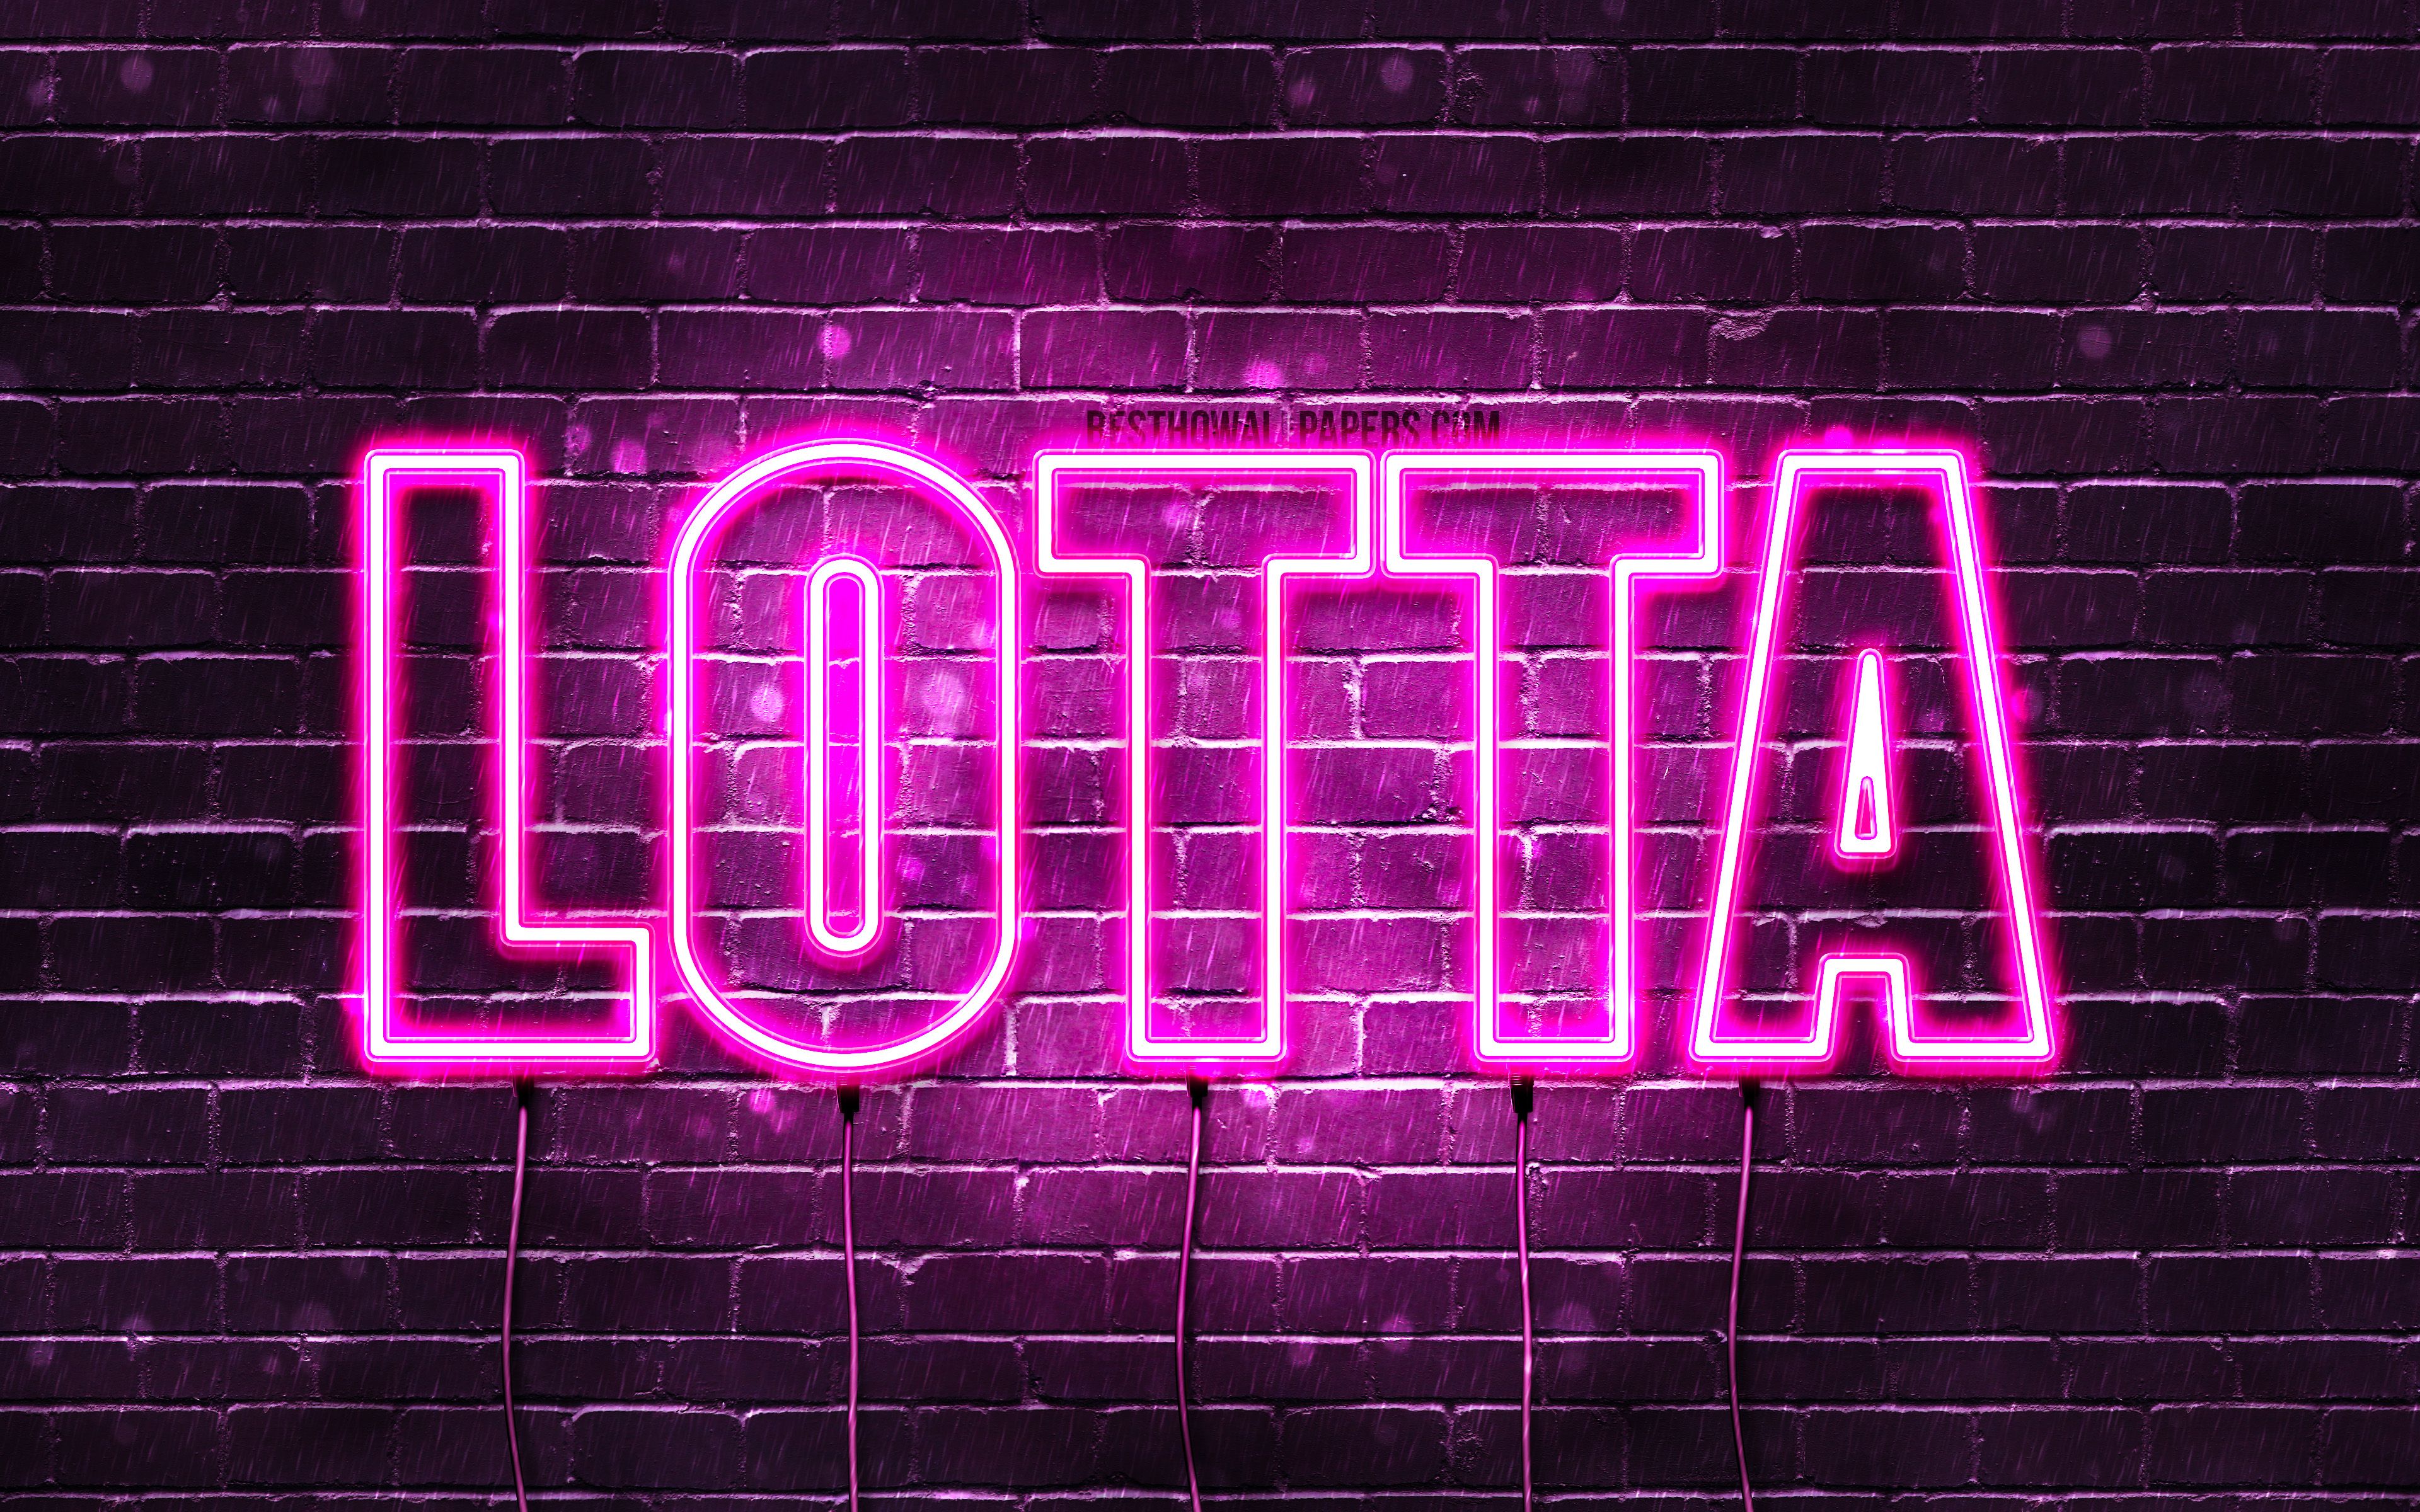 Download wallpaper Lotta, 4k, wallpaper with names, female names, Lotta name, purple neon lights, Happy Birthday Lotta, popular german female names, picture with Lotta name for desktop with resolution 3840x2400. High Quality